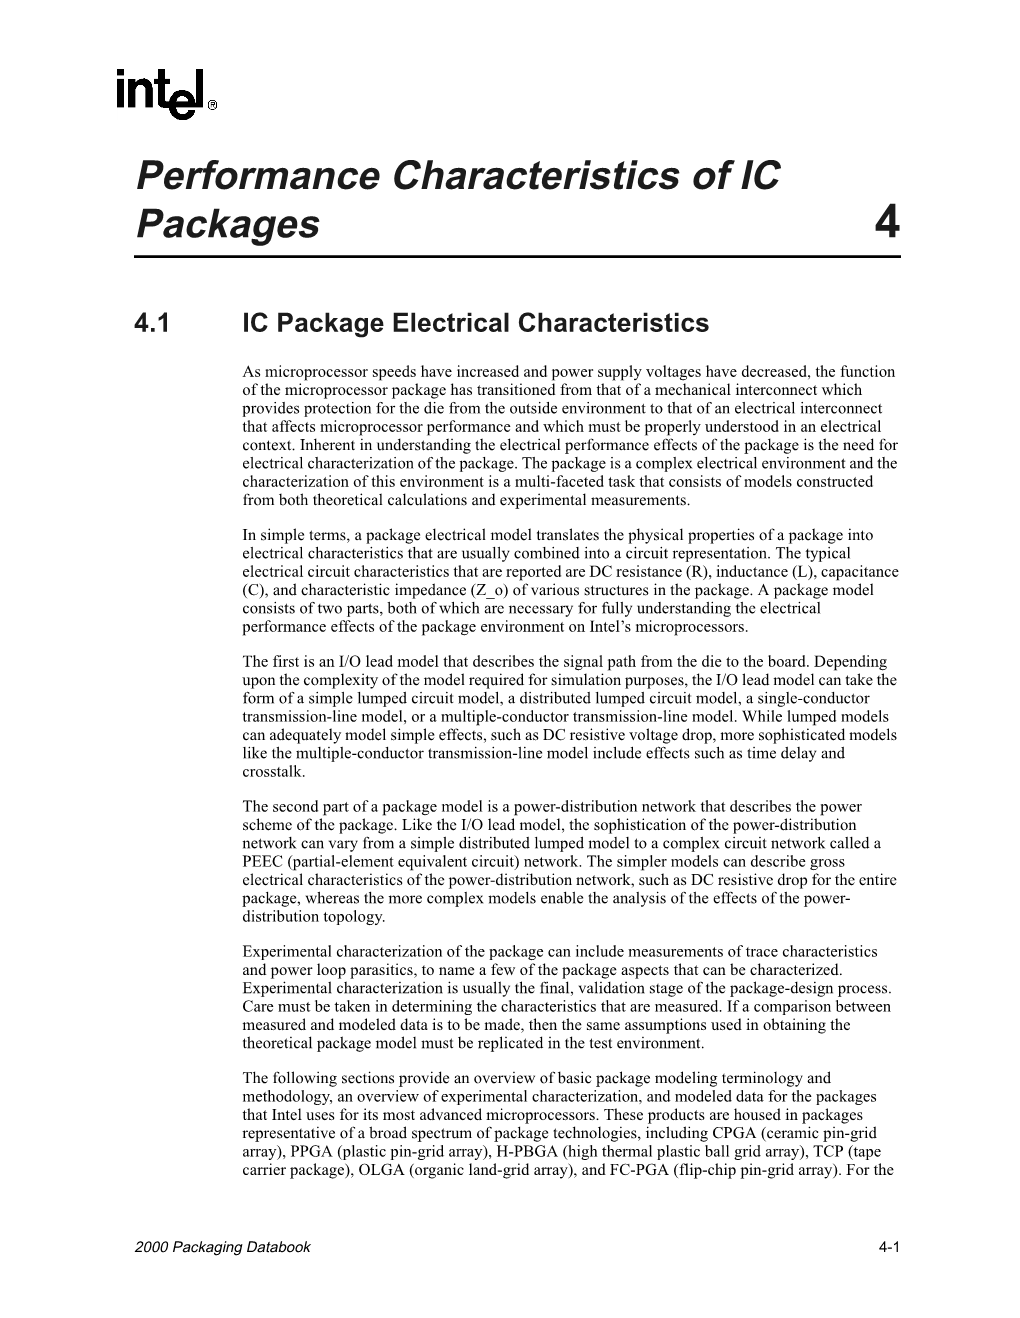 Performance Characteristics of IC Packages 4